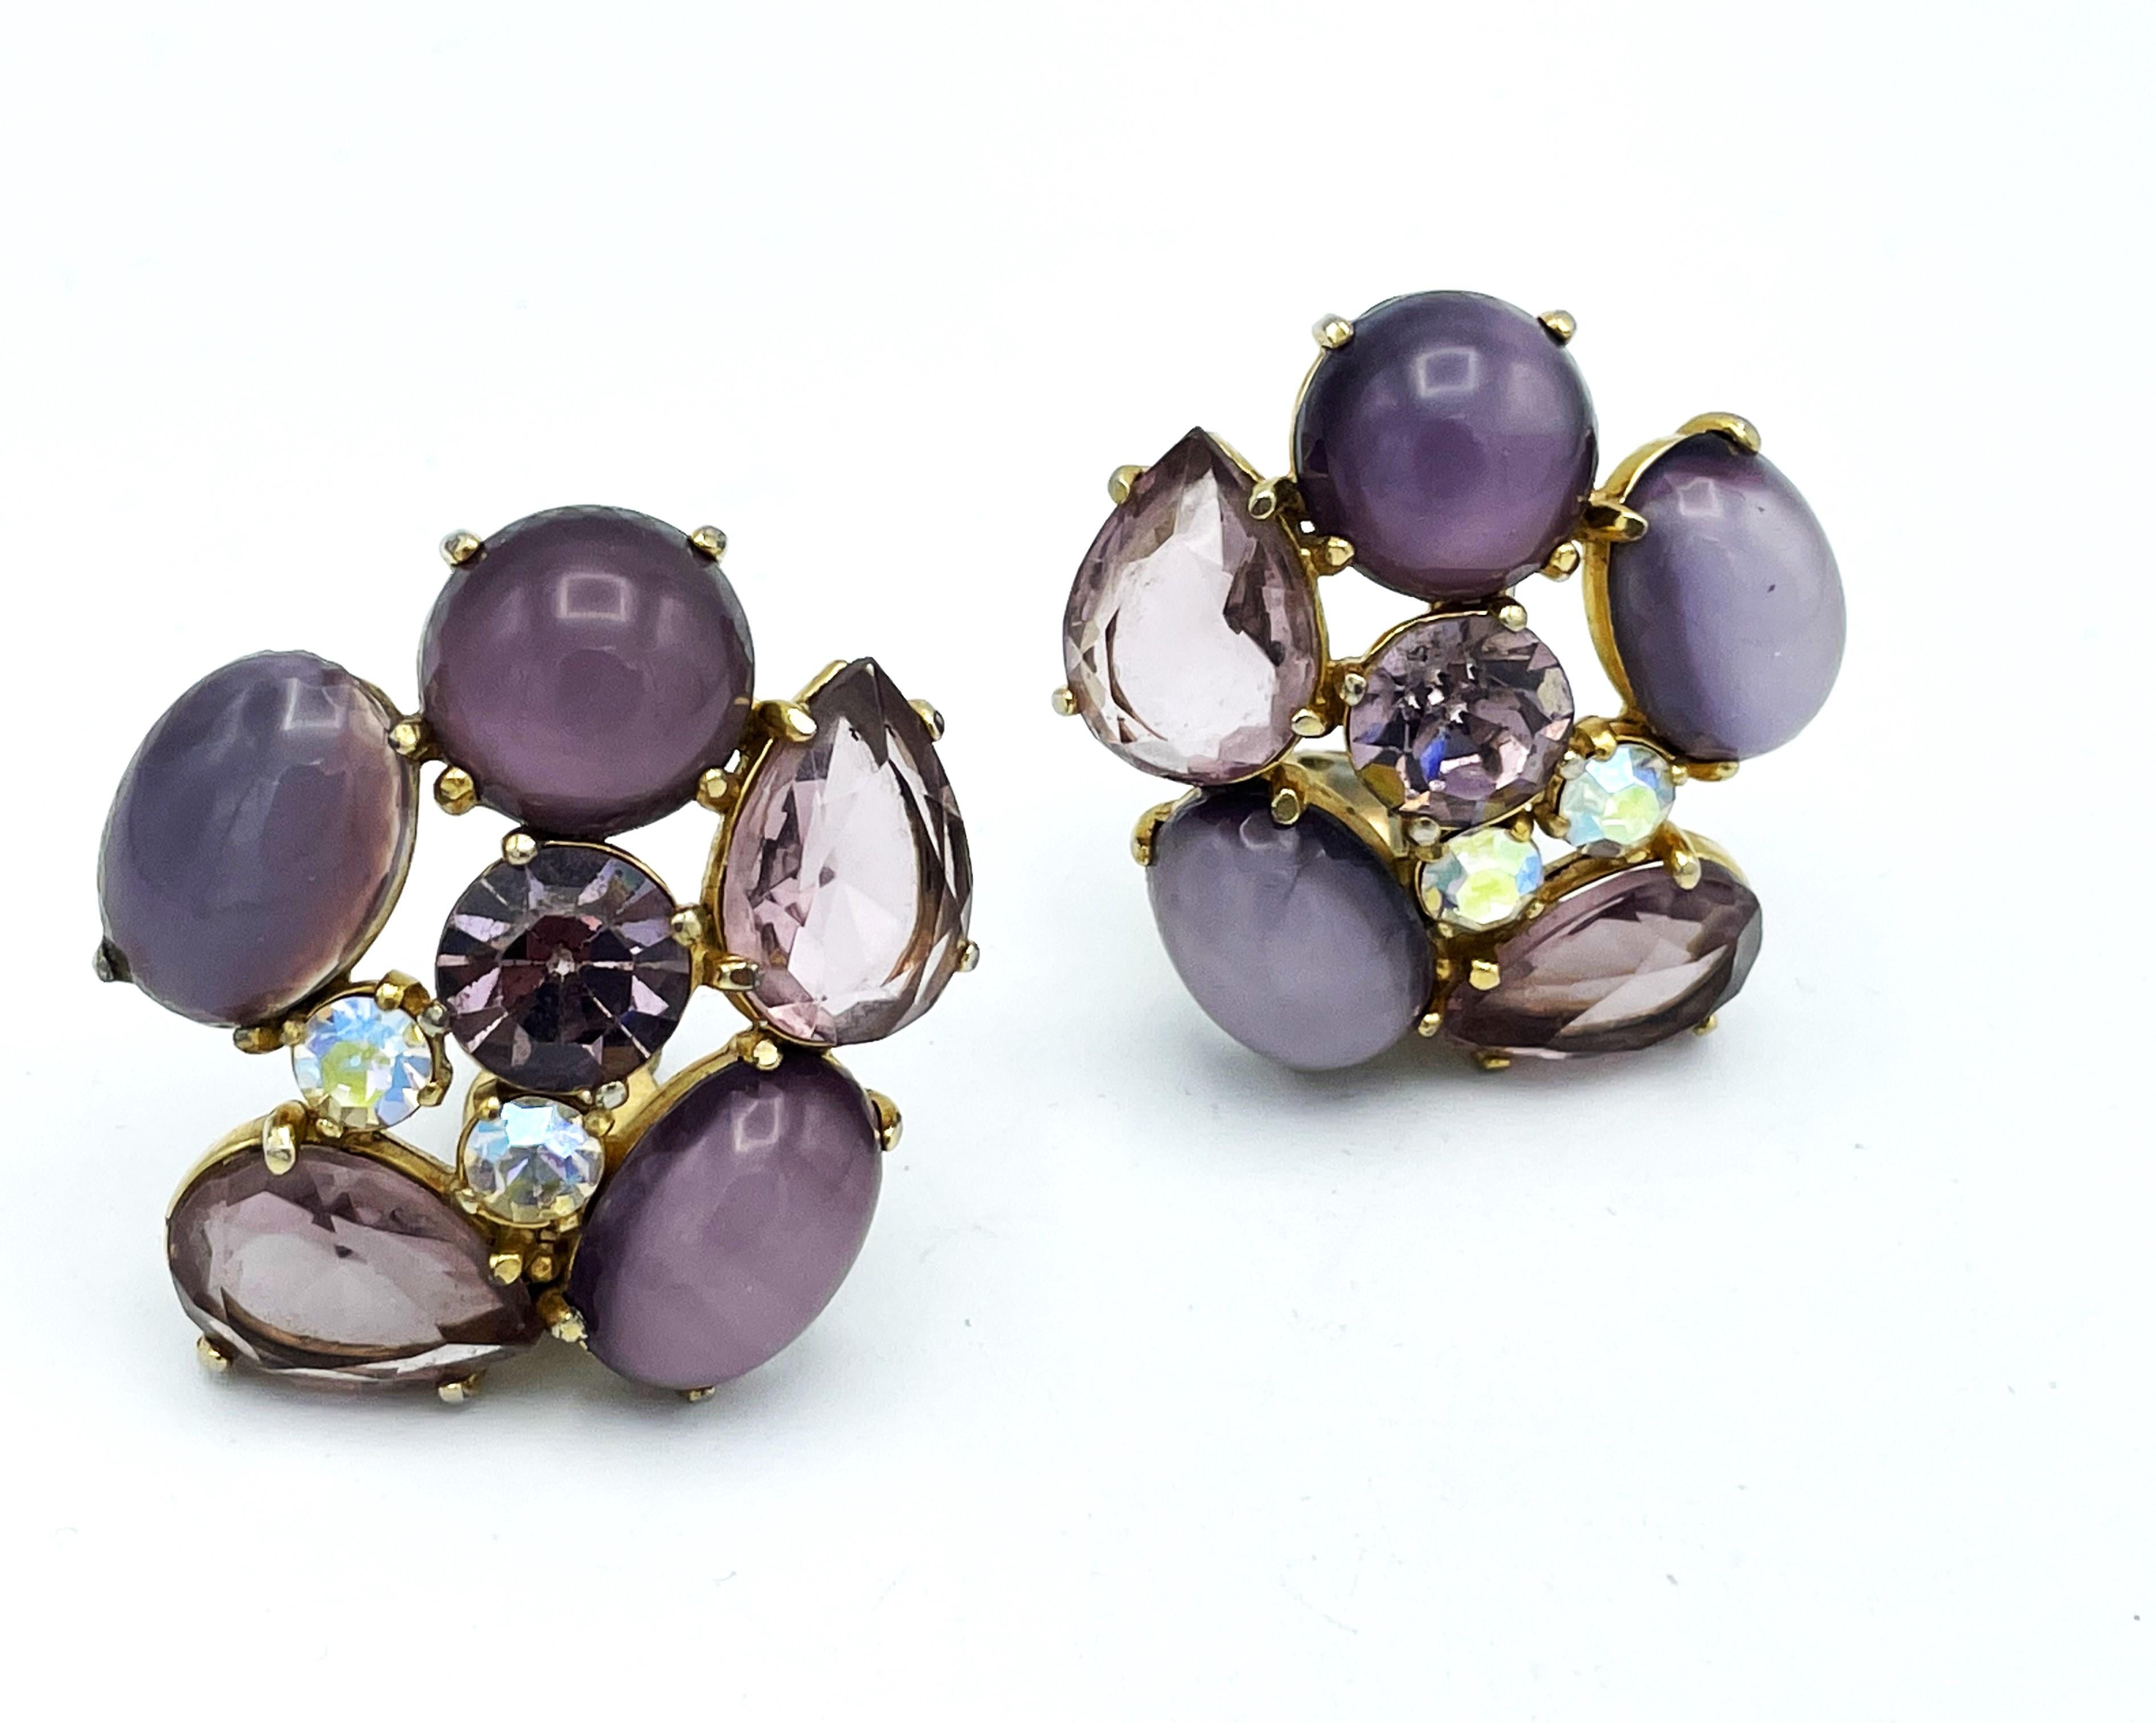 Women's Clip-on earring by Schiaparelli Italy, different light lilac rhinestones, 1950s 